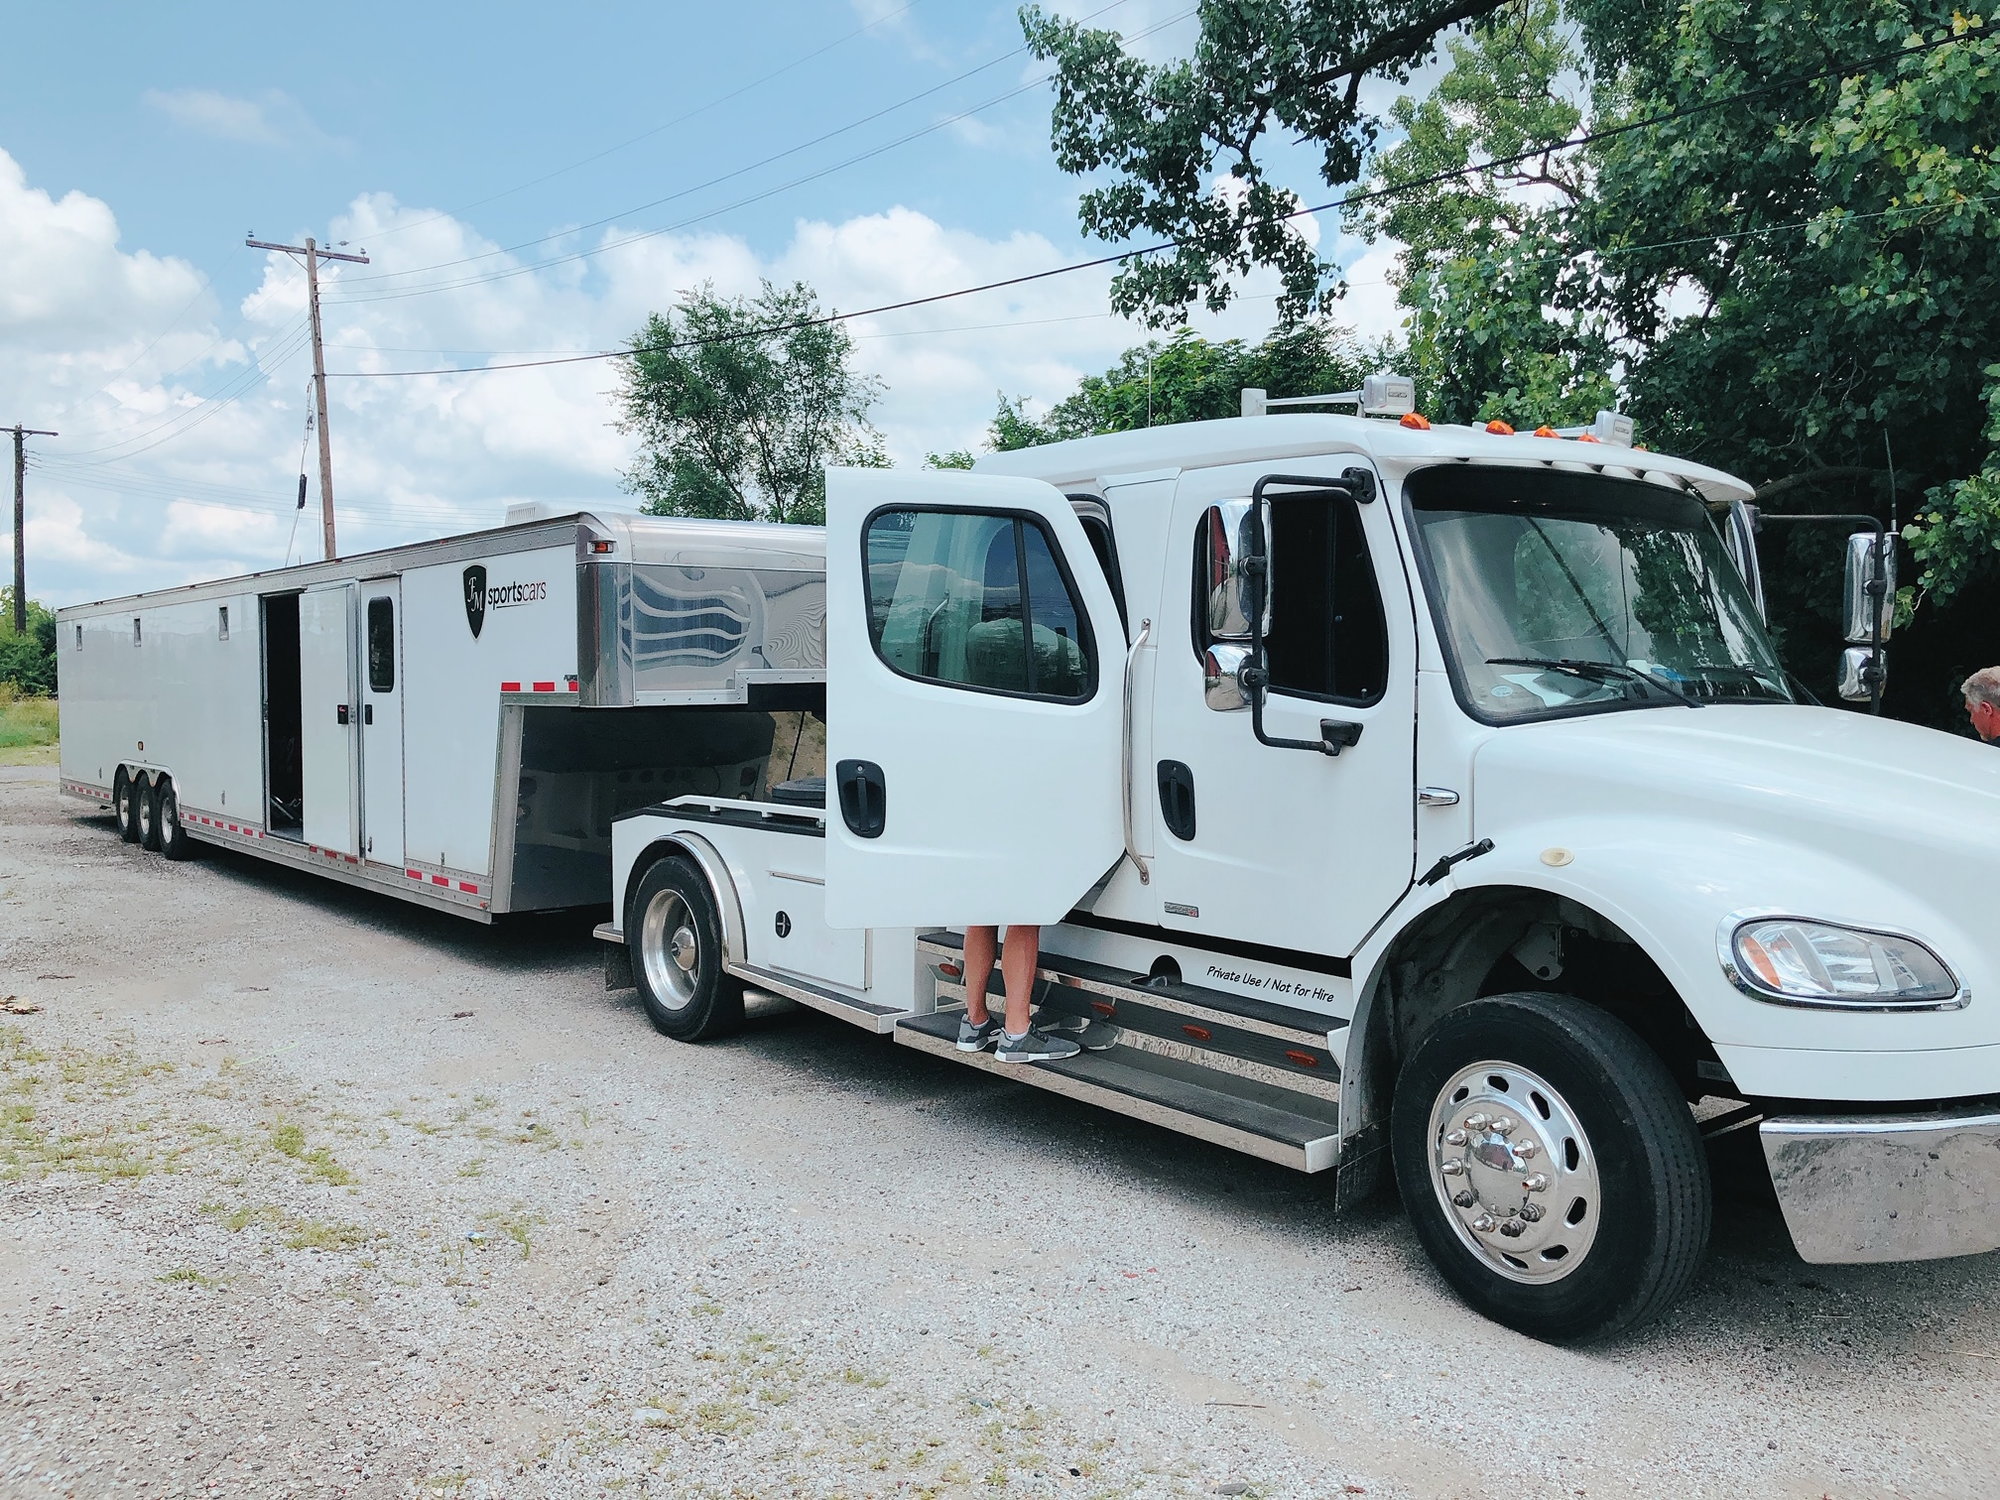 2007 Porsche 911 - 2007 Freightliner Sports Chasis M2 (Toy Hauler) - Used - VIN 1FVACVDC87HY20971 - 4WD - Automatic - Truck - White - Louisville, KY 40210, United States